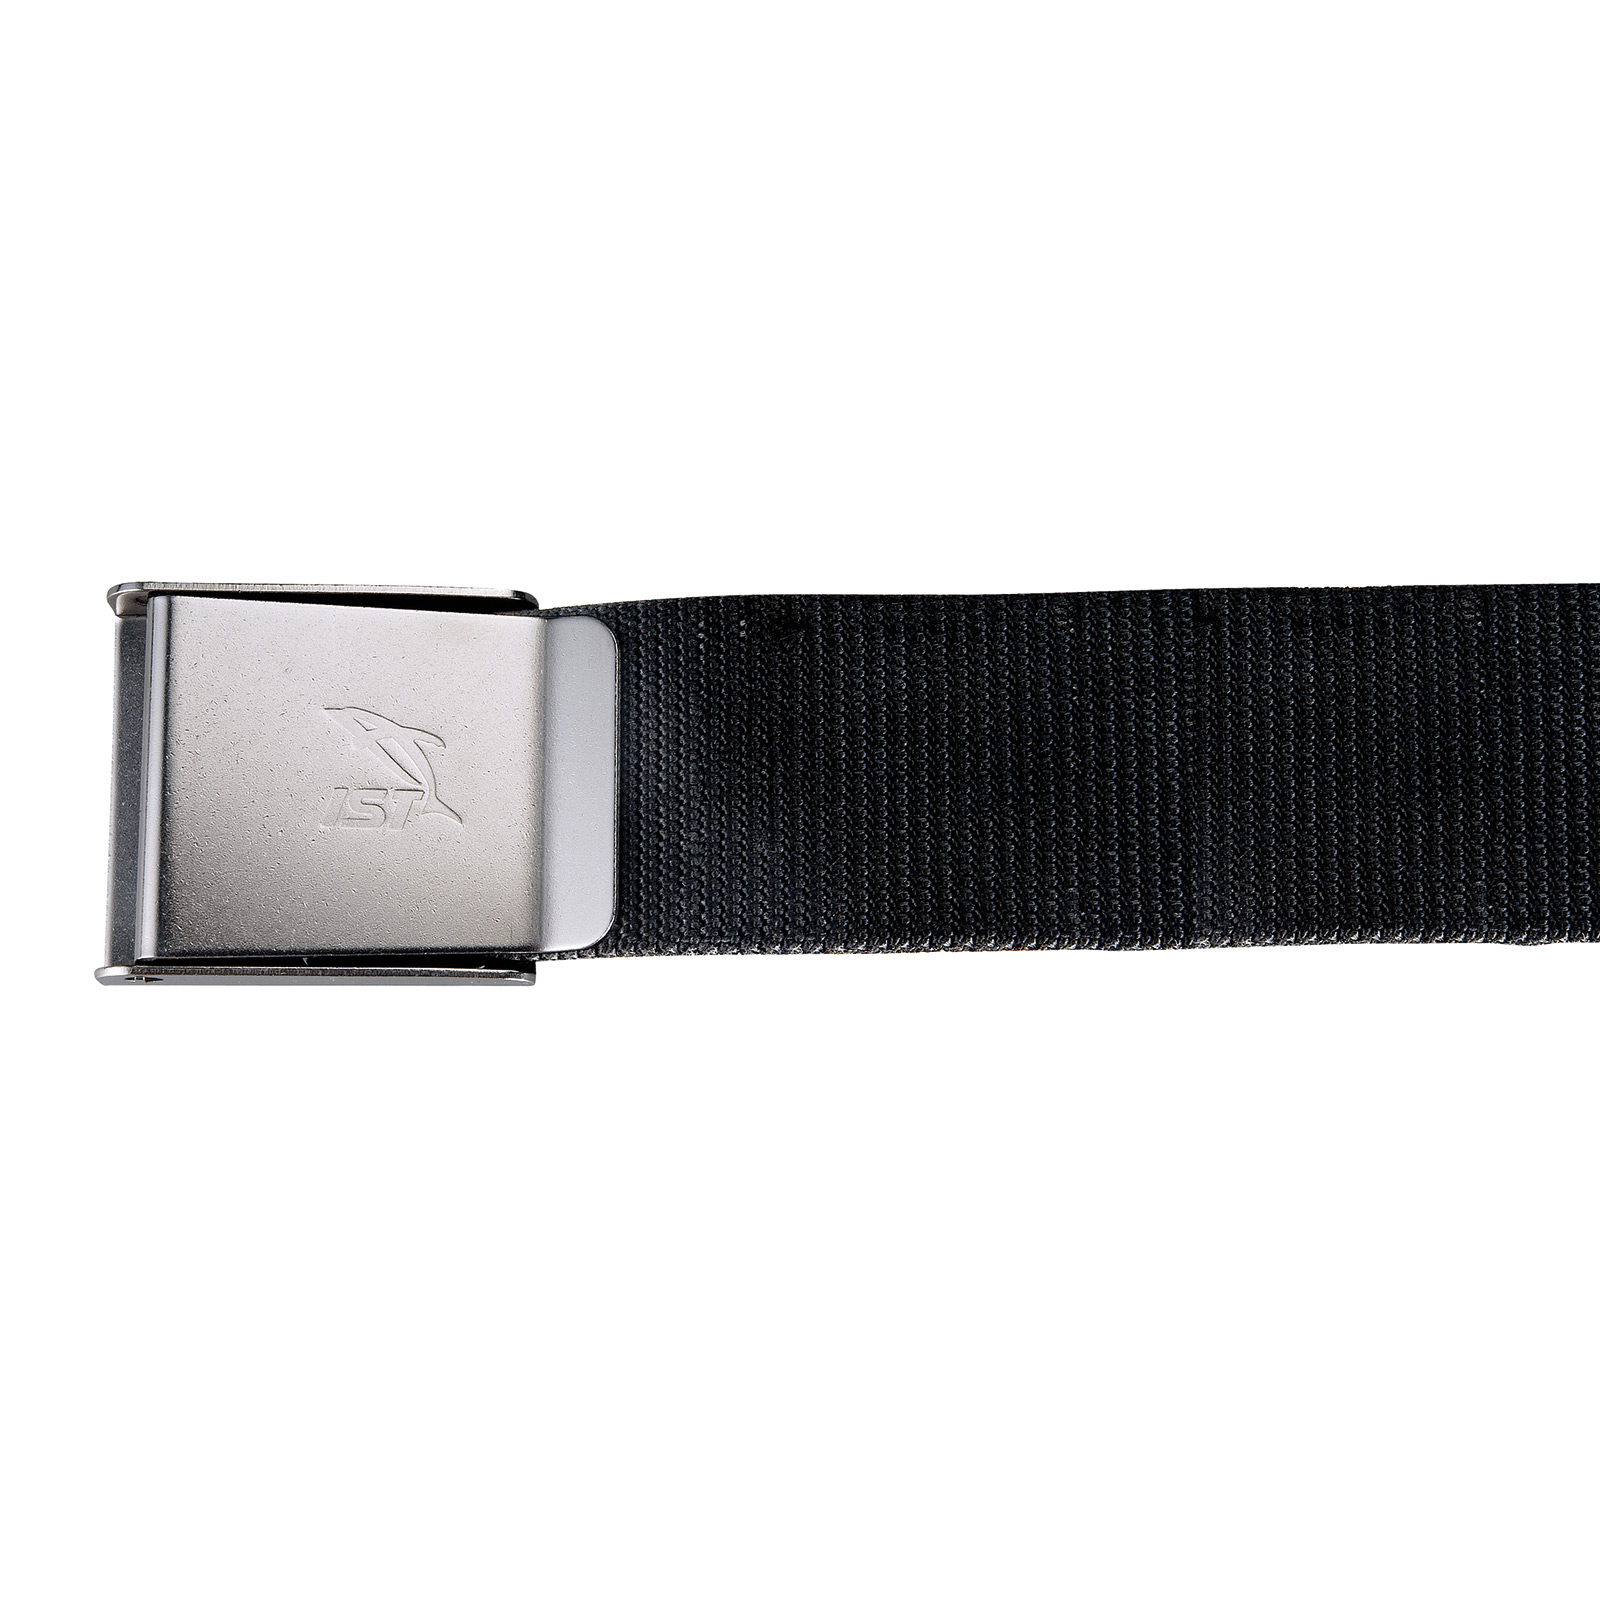 Weight Belt with Stainless Steel Buckle